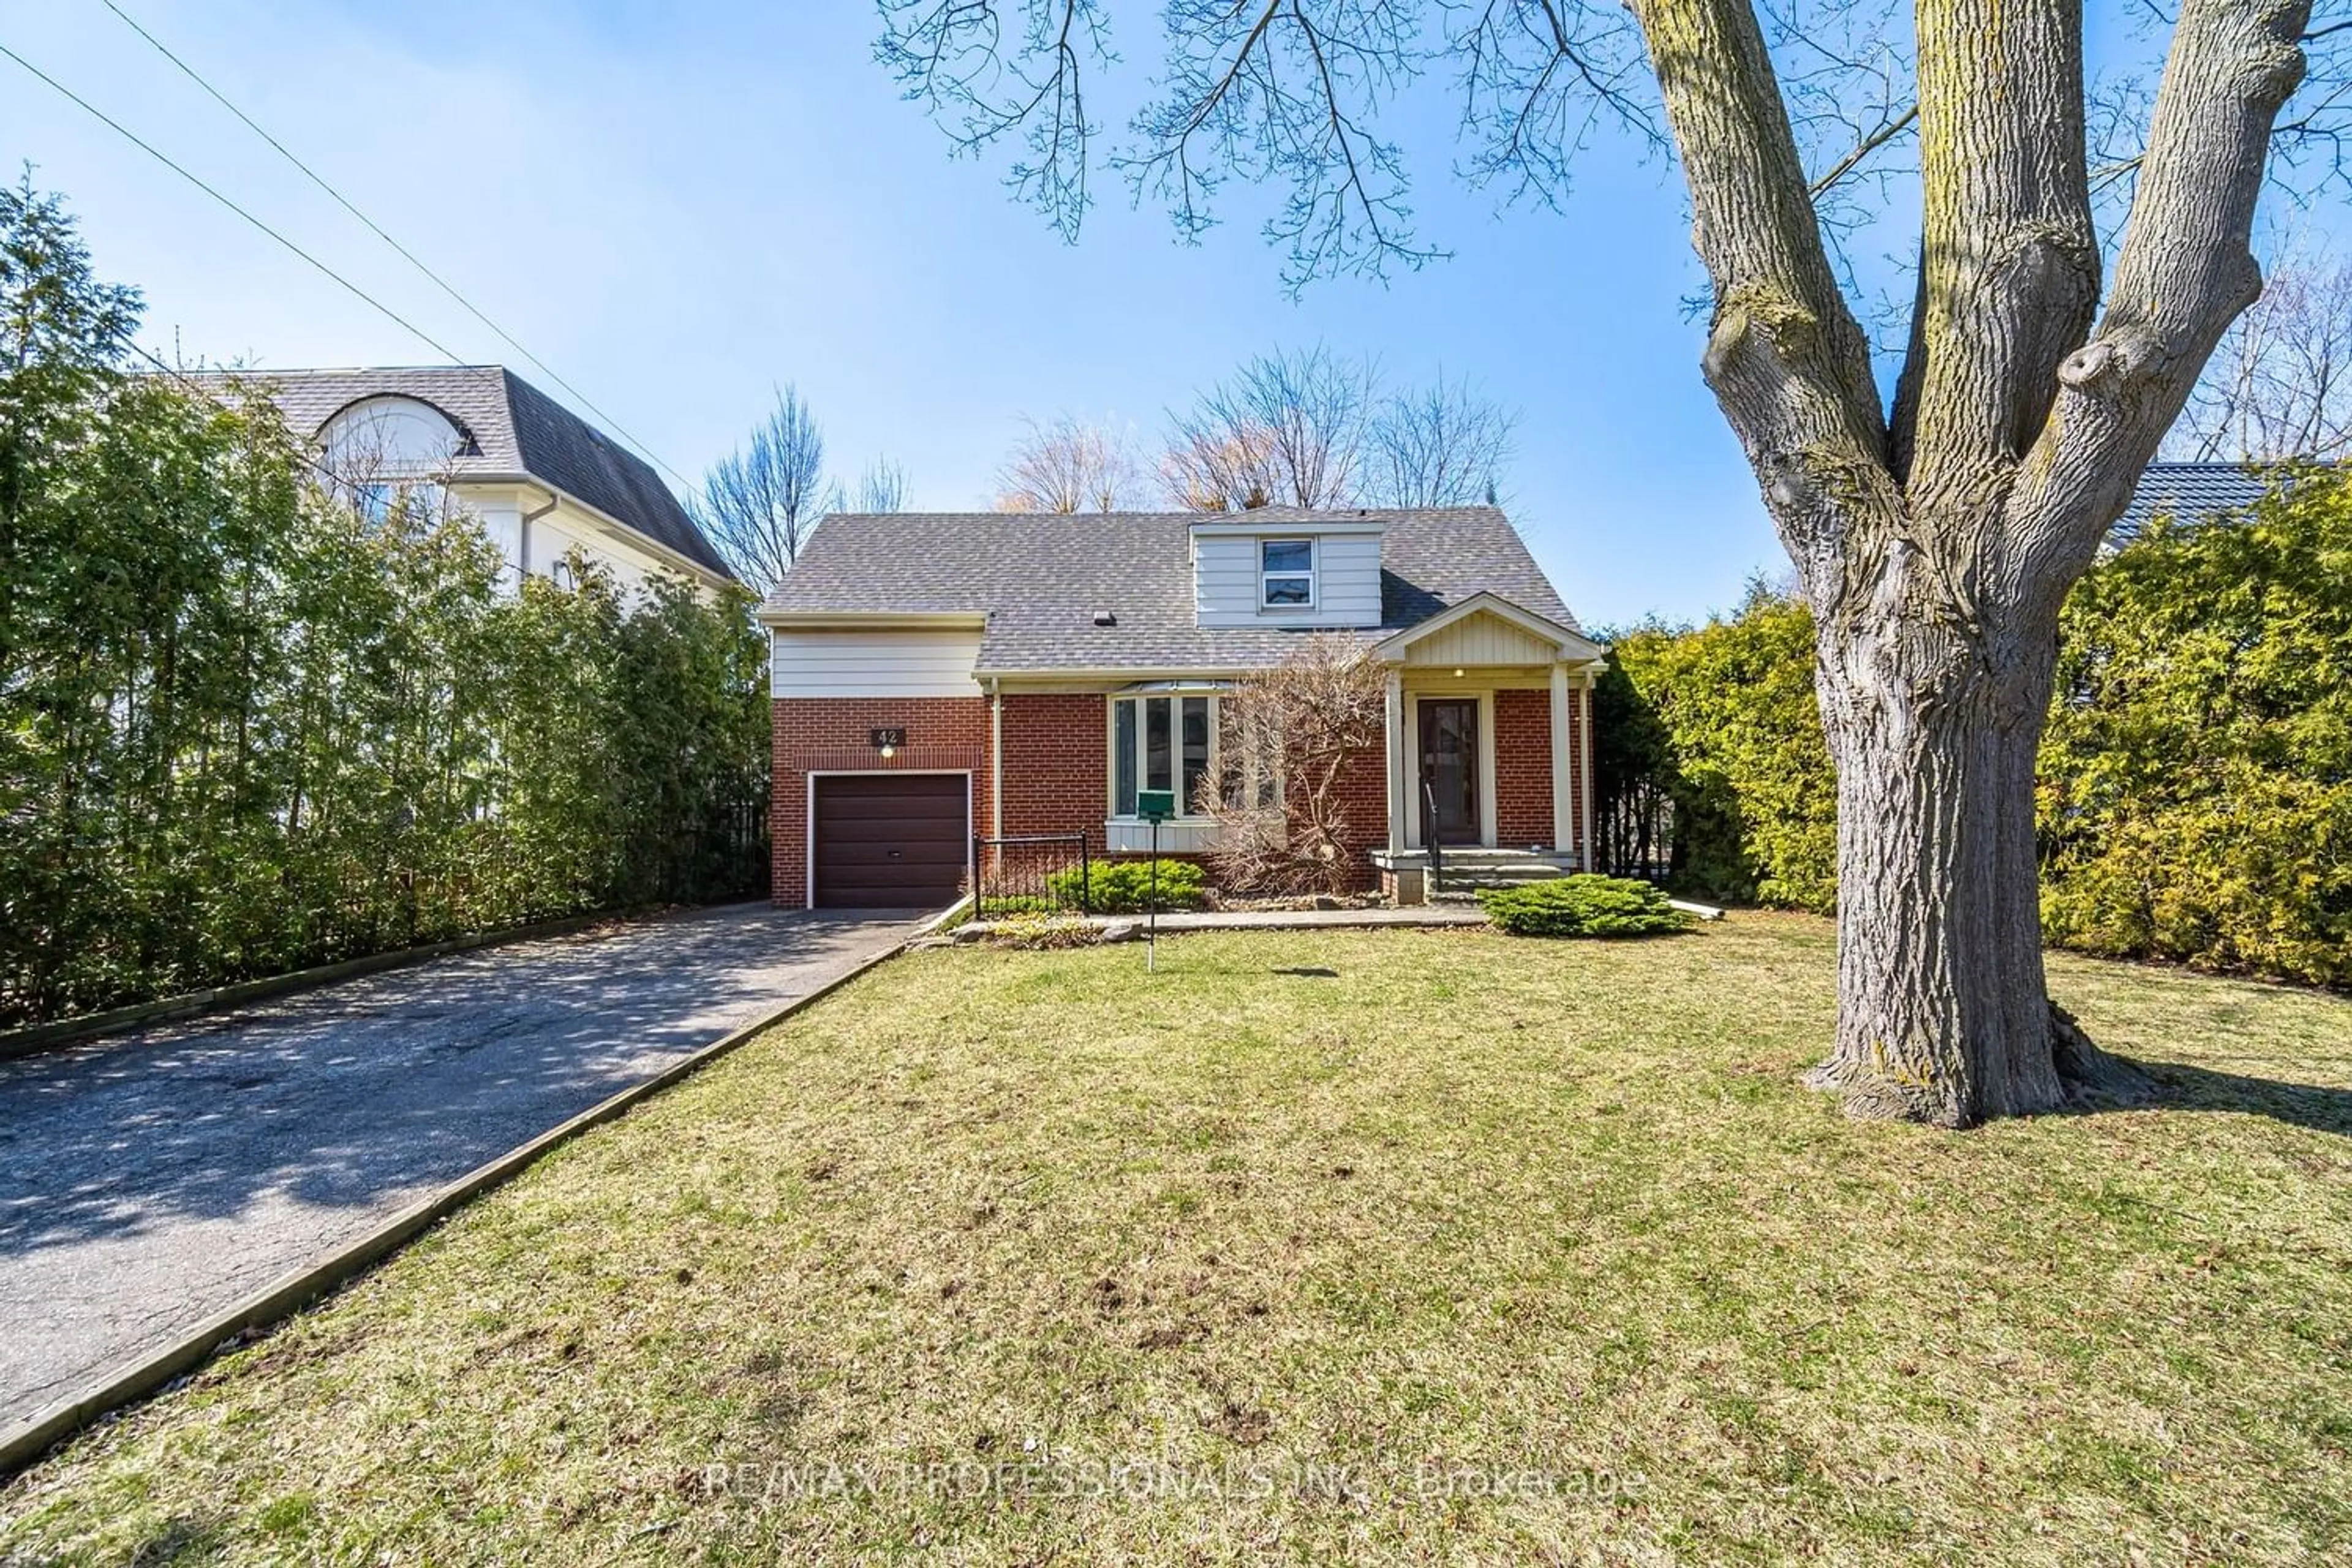 Home with brick exterior material for 42 Chestnut Hills Pkwy, Toronto Ontario M9A 3P6